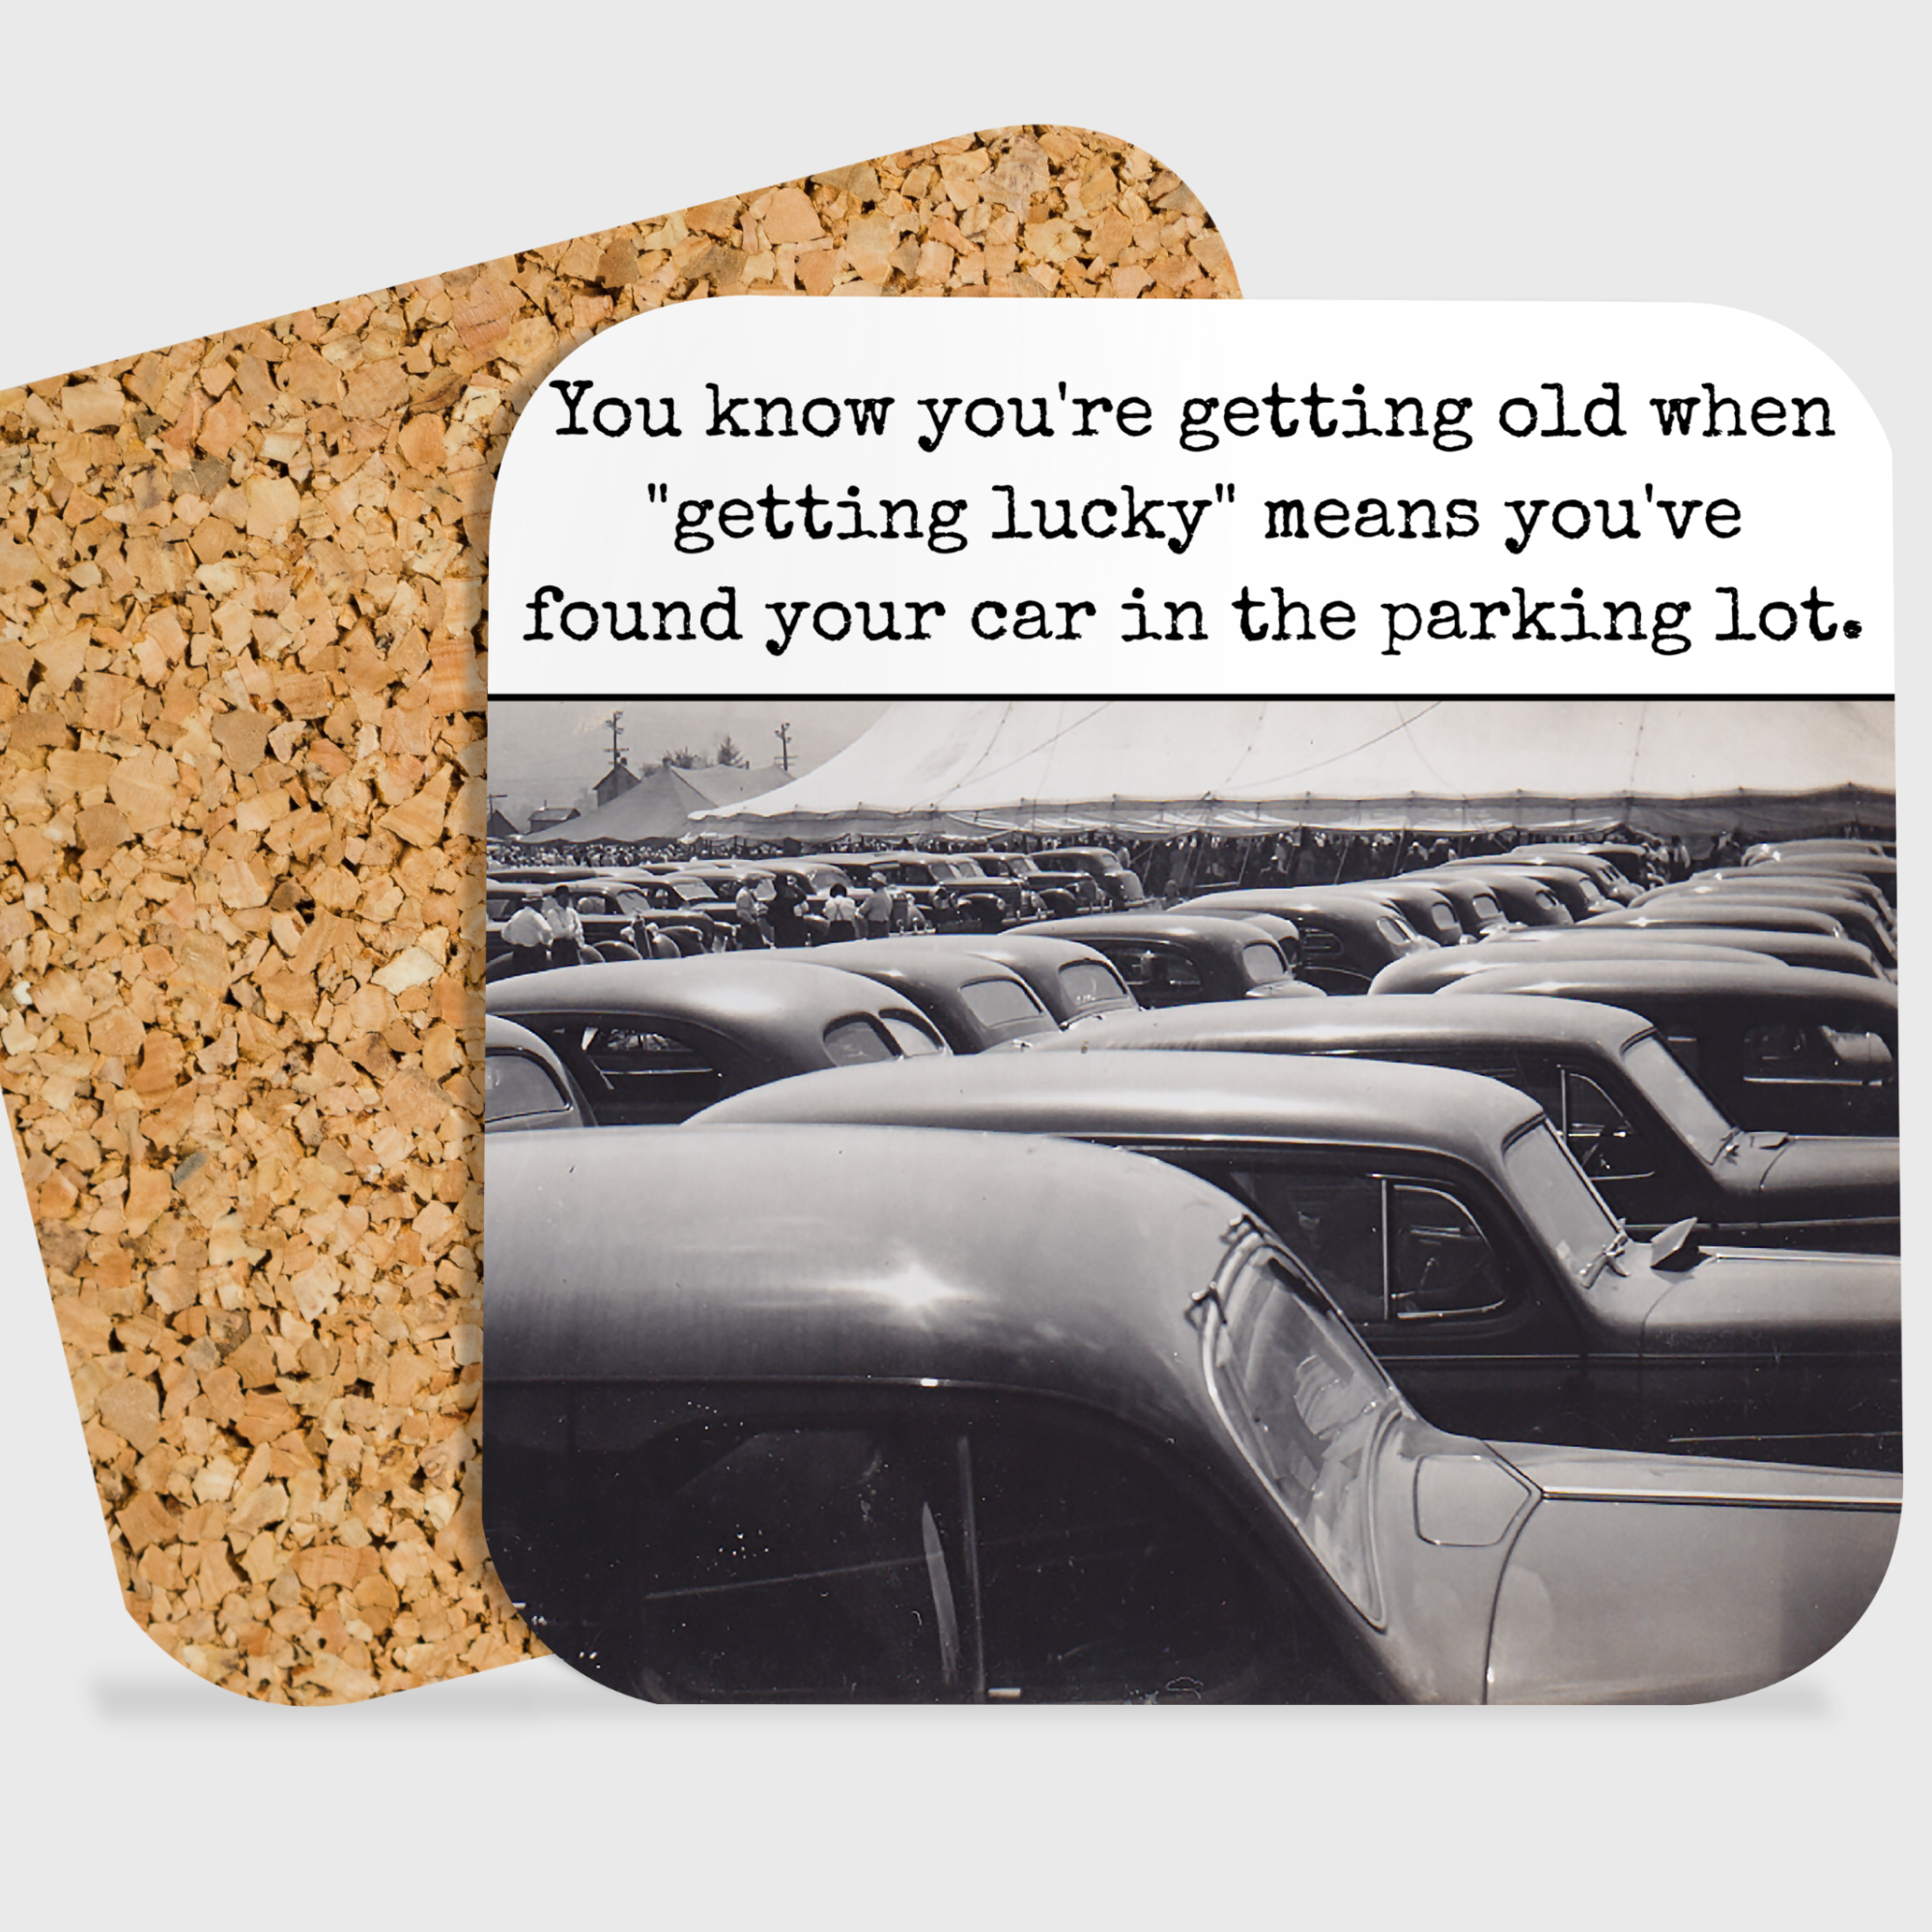 COASTER. "Getting Lucky" Means You've Found Your Car...